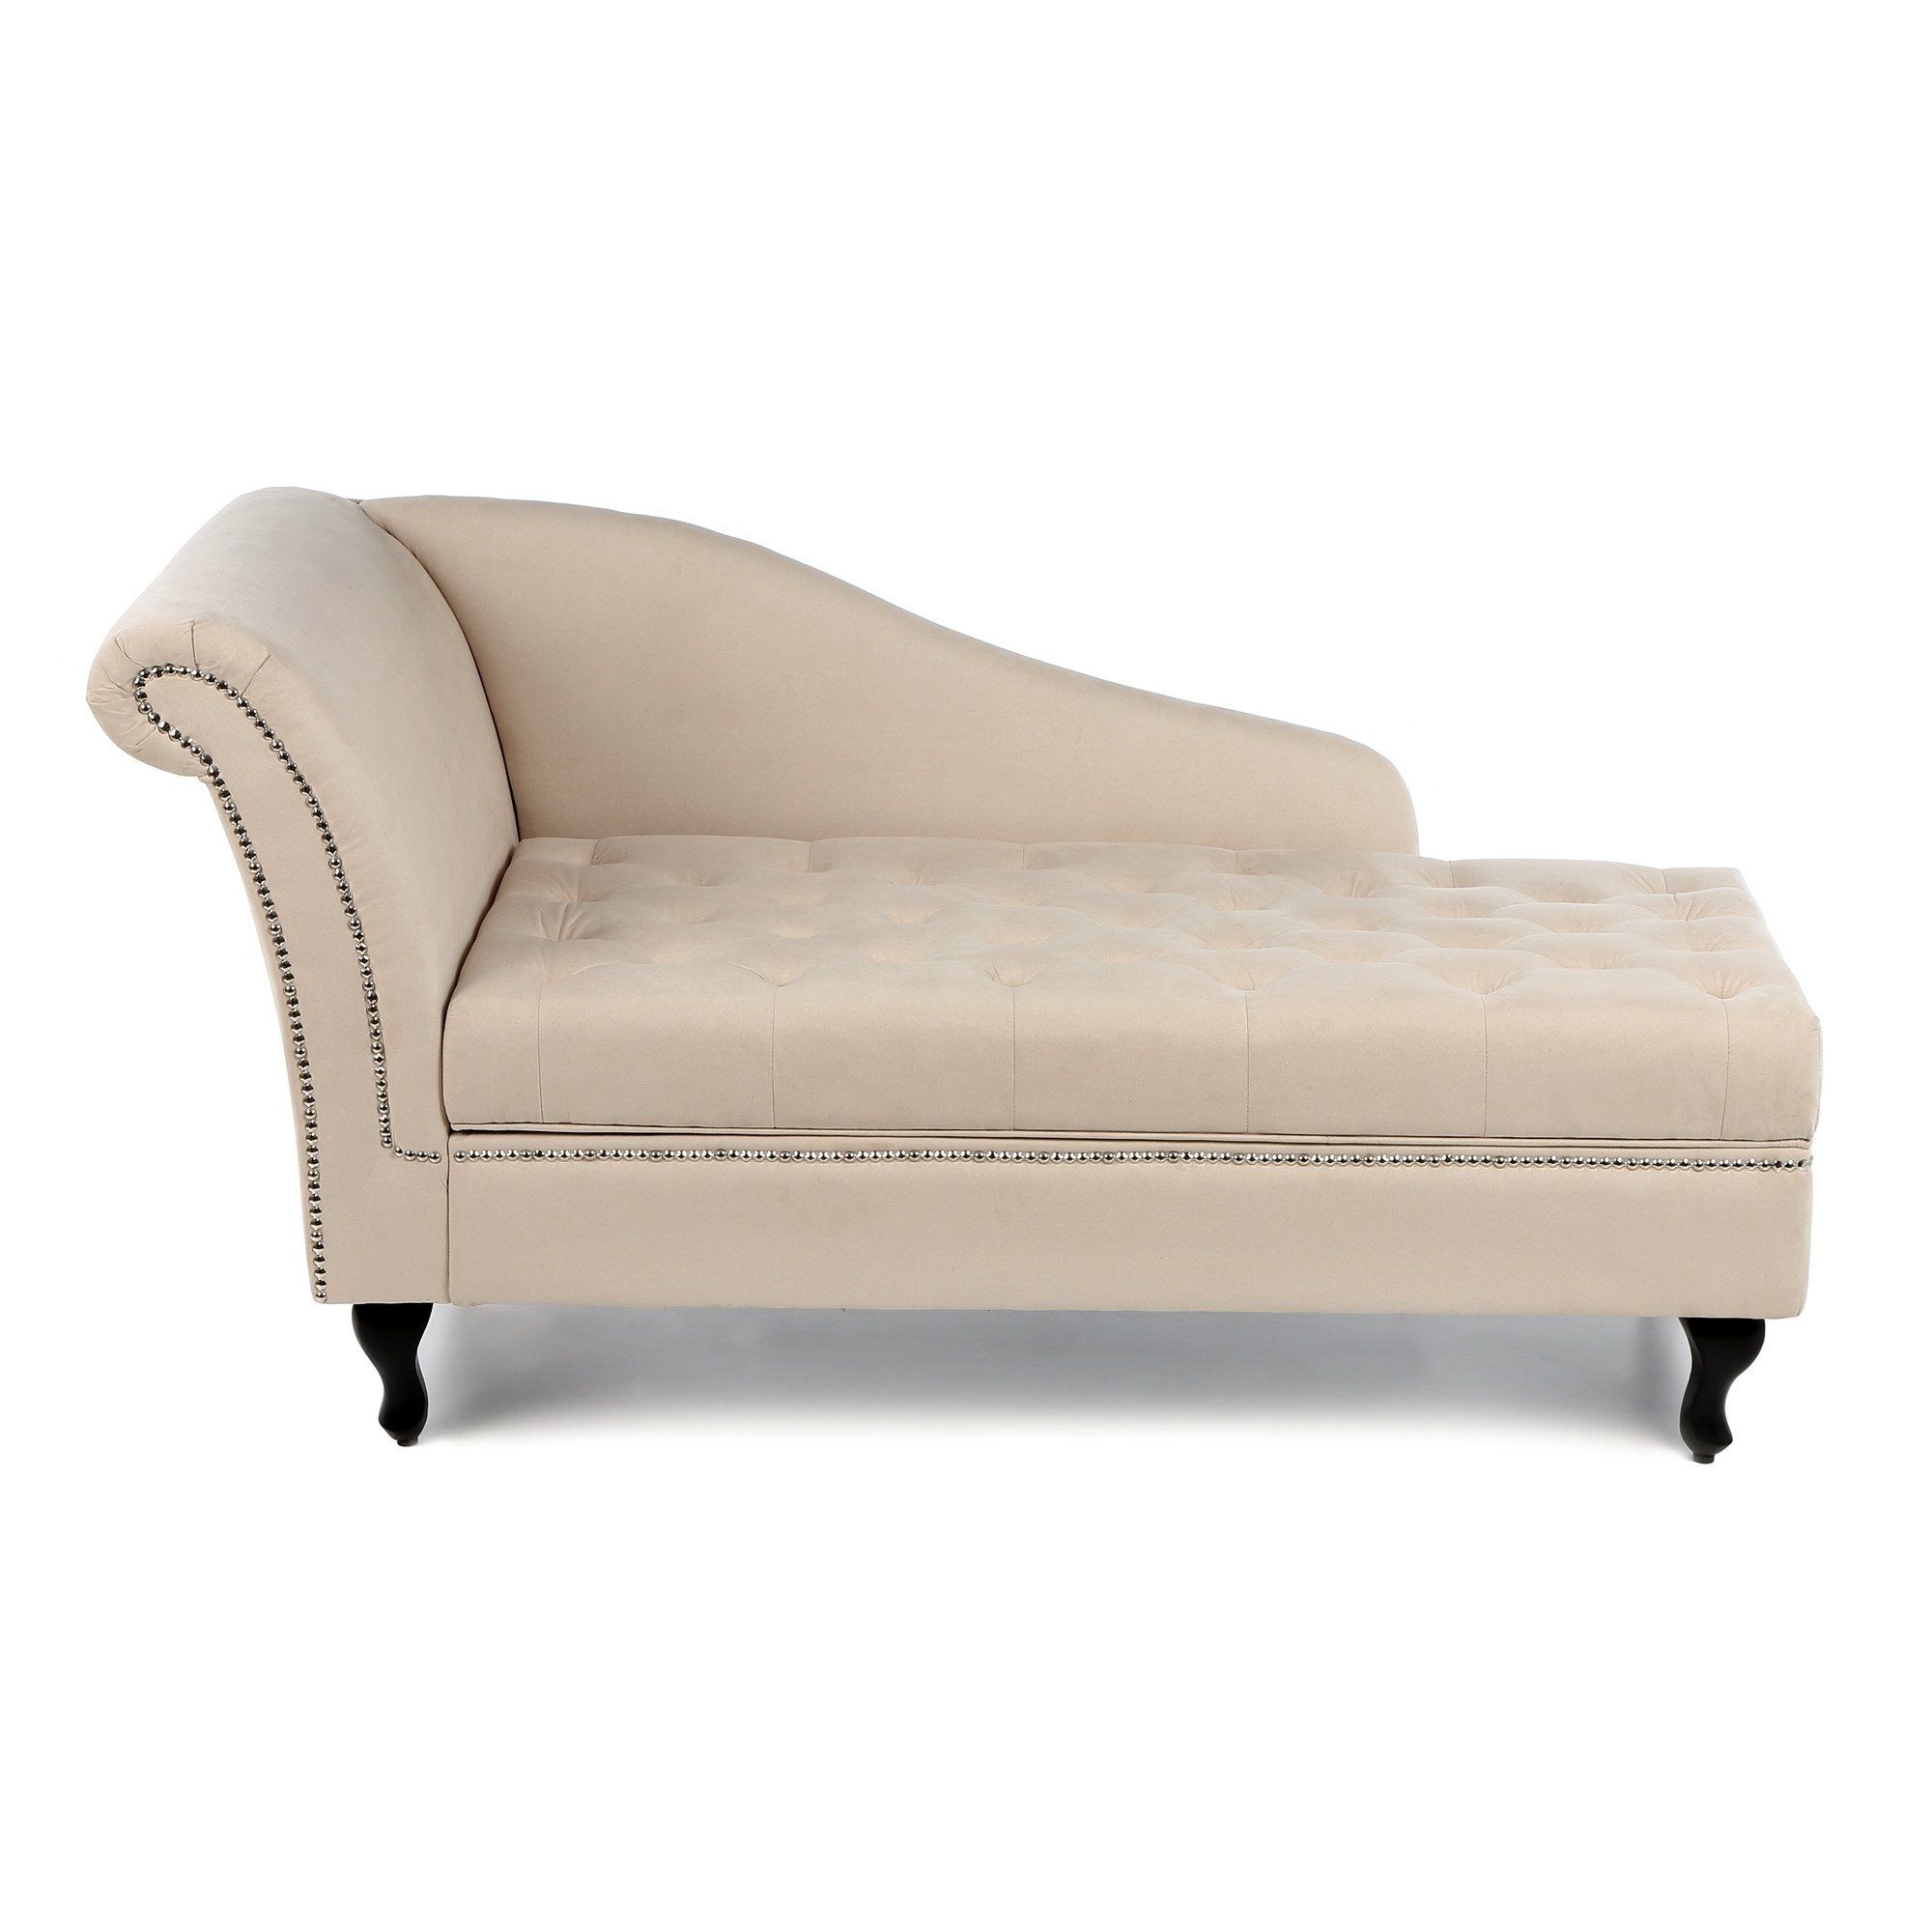 $300 Amazon – Storage Chaise Lounge Luxurious Tufted Classic Intended For Most Recent Chaise Lounge Daybeds (View 6 of 15)